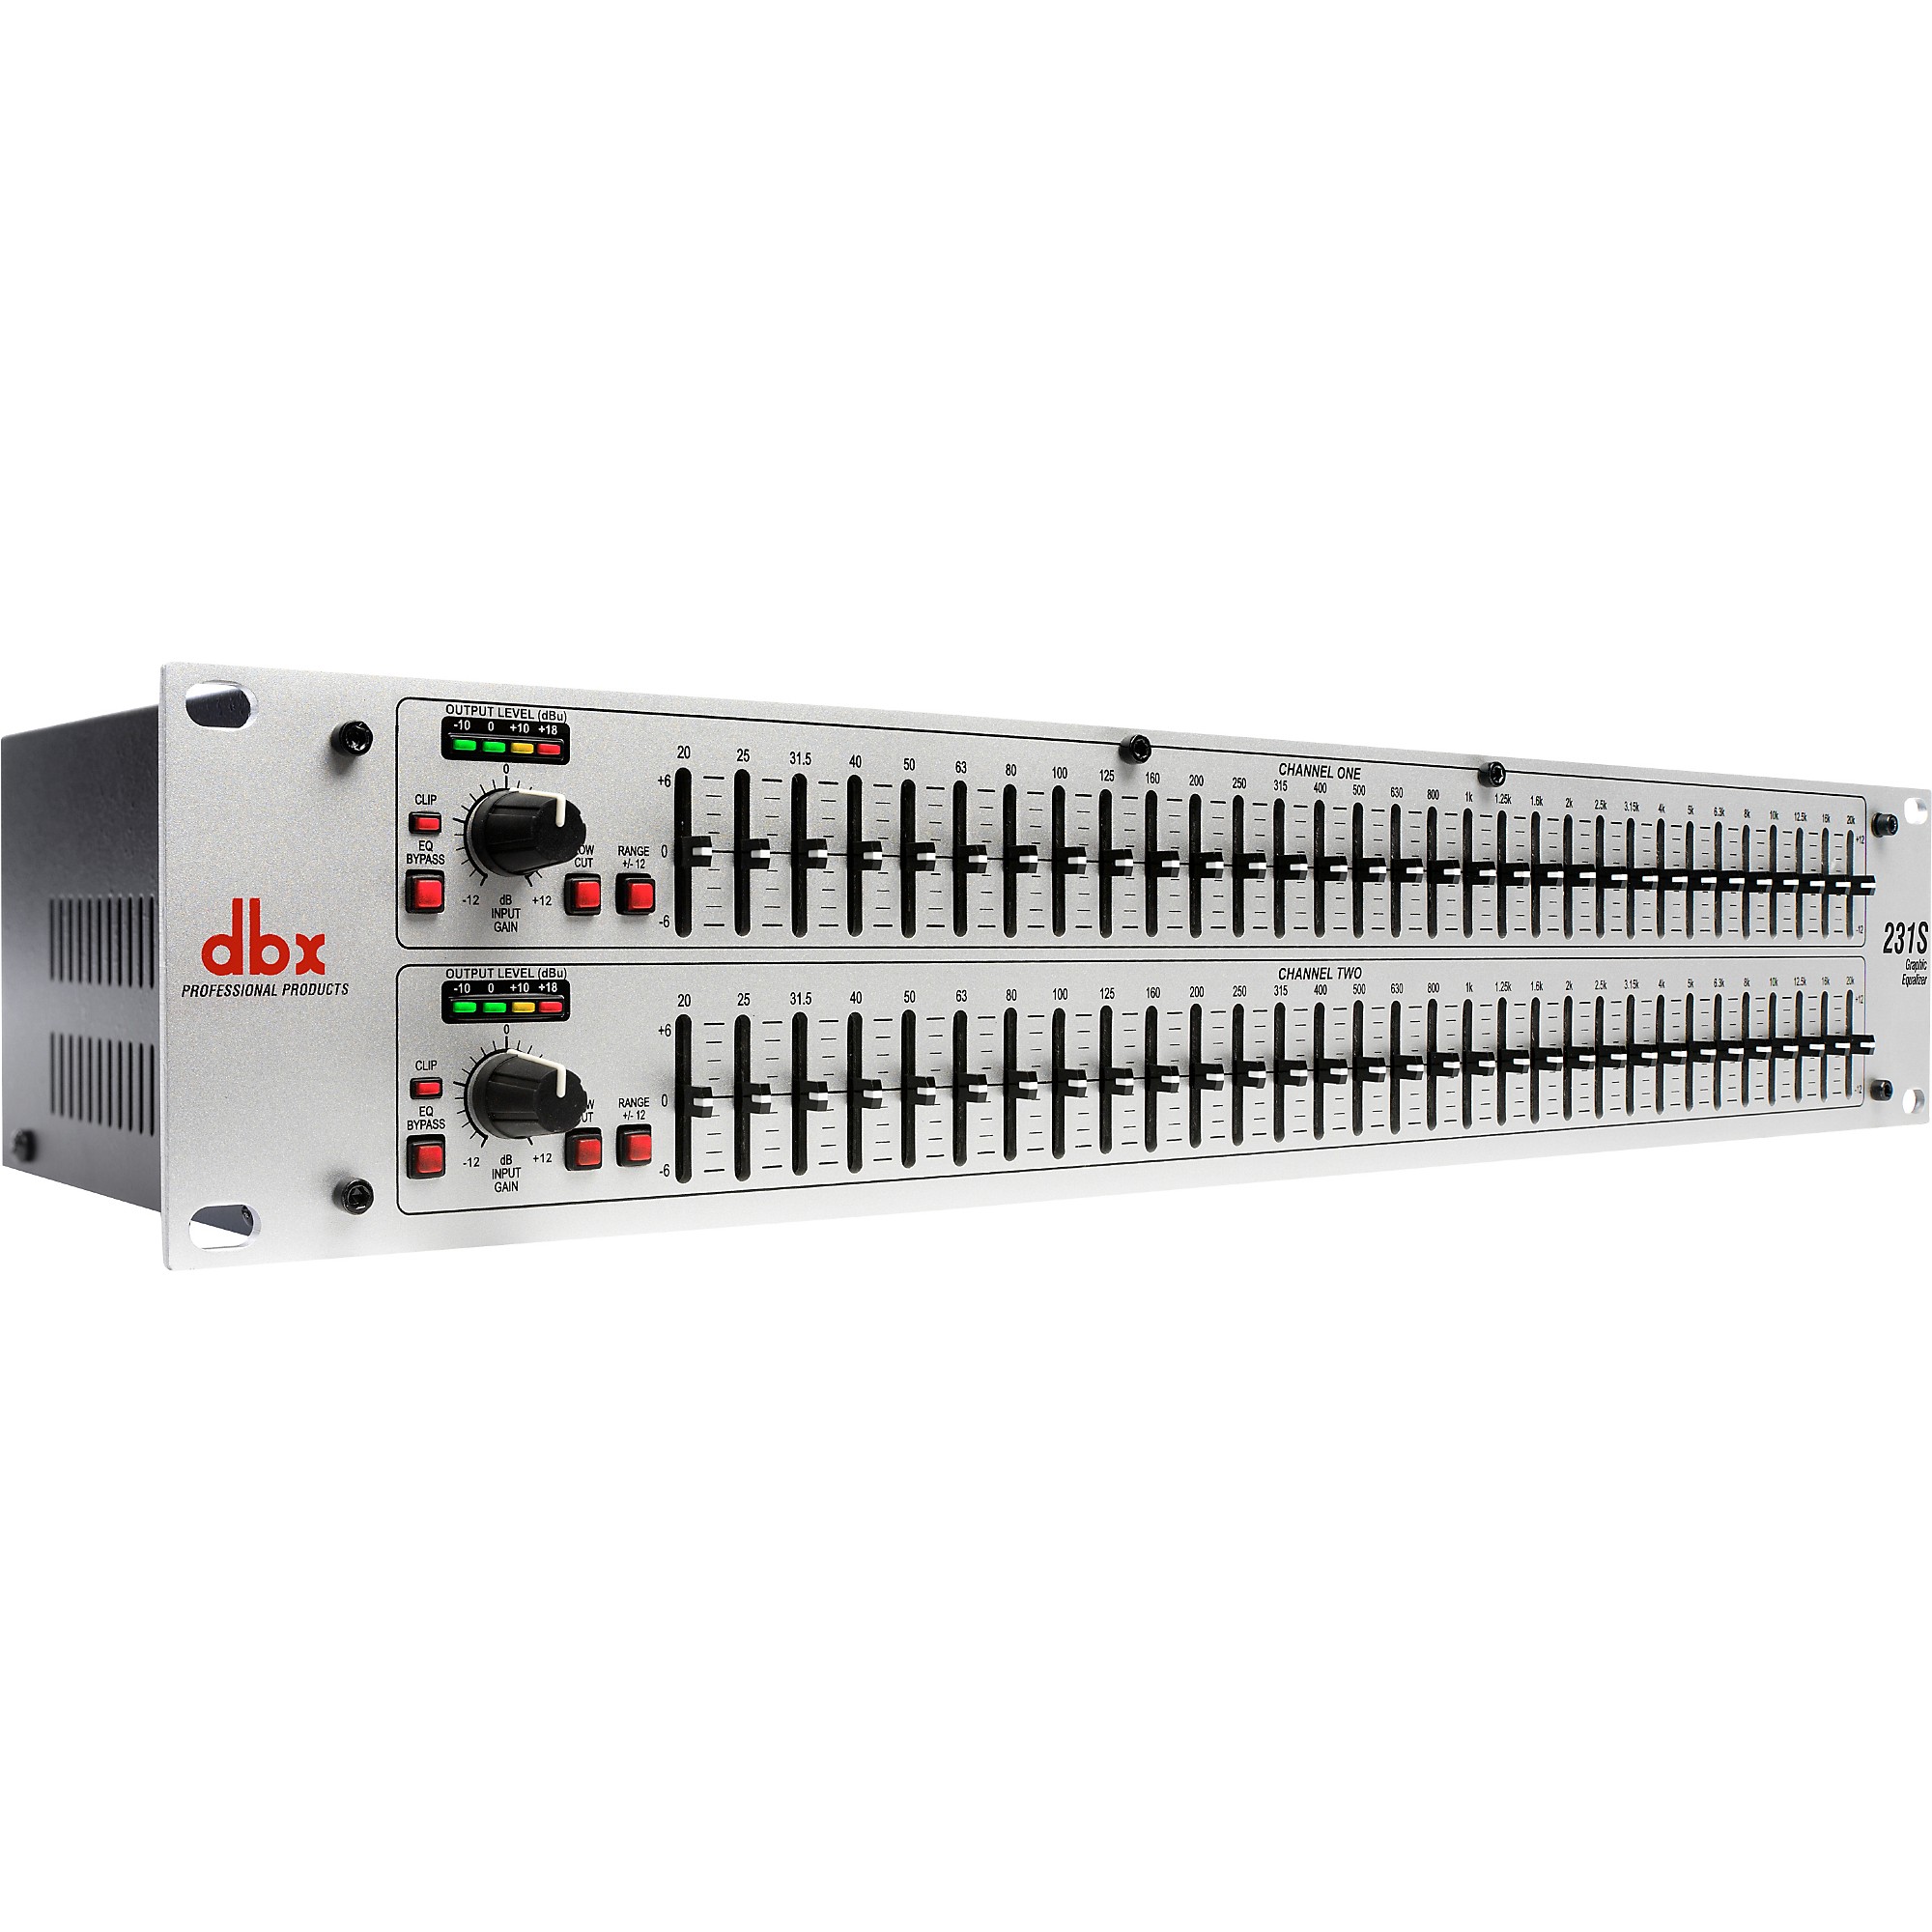 dbx 231s Dual-Channel 31-Band Graphic Equalizer | Music & Arts